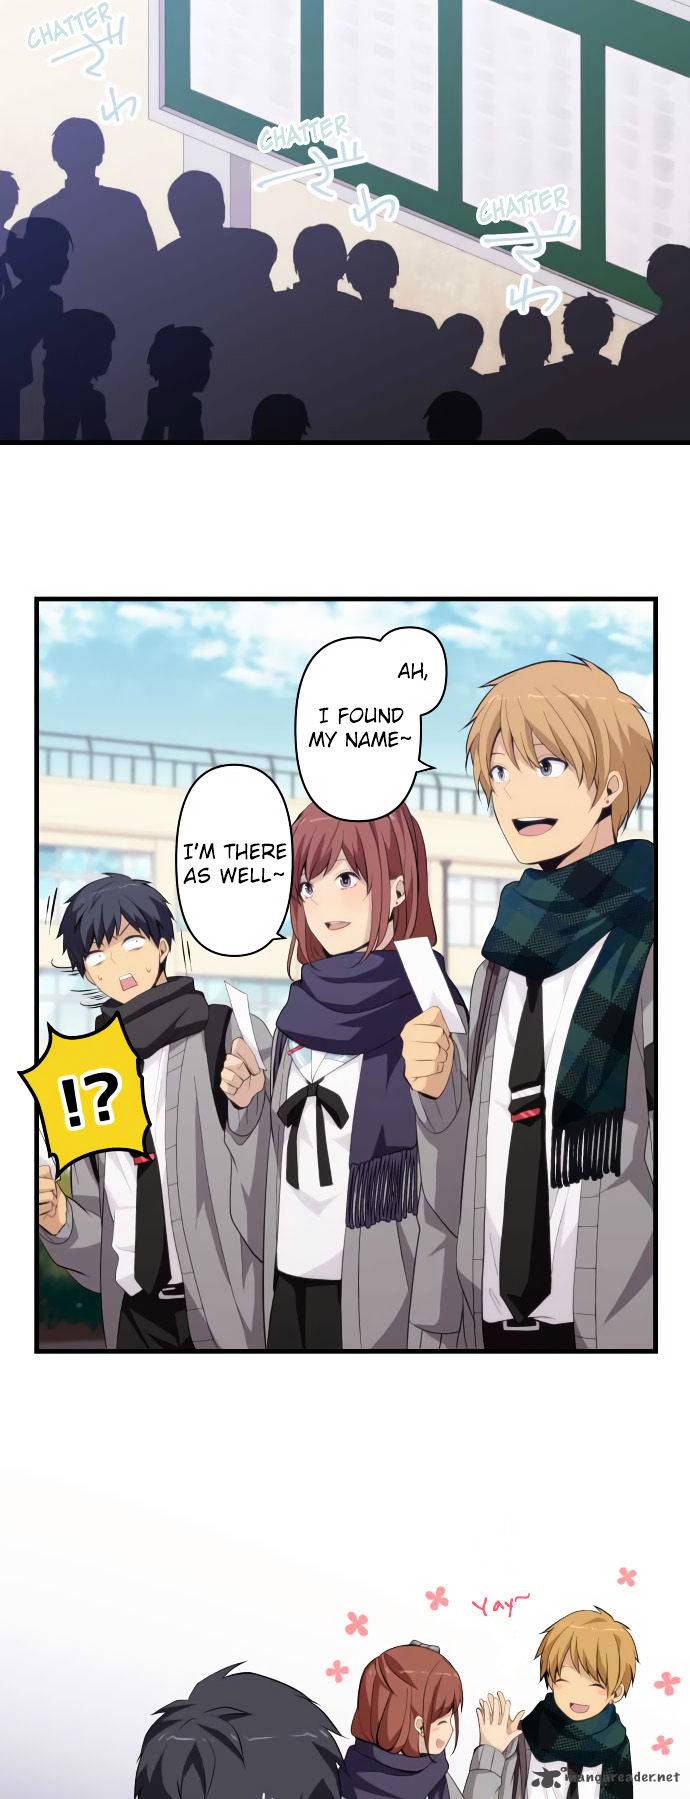 relife_206_5